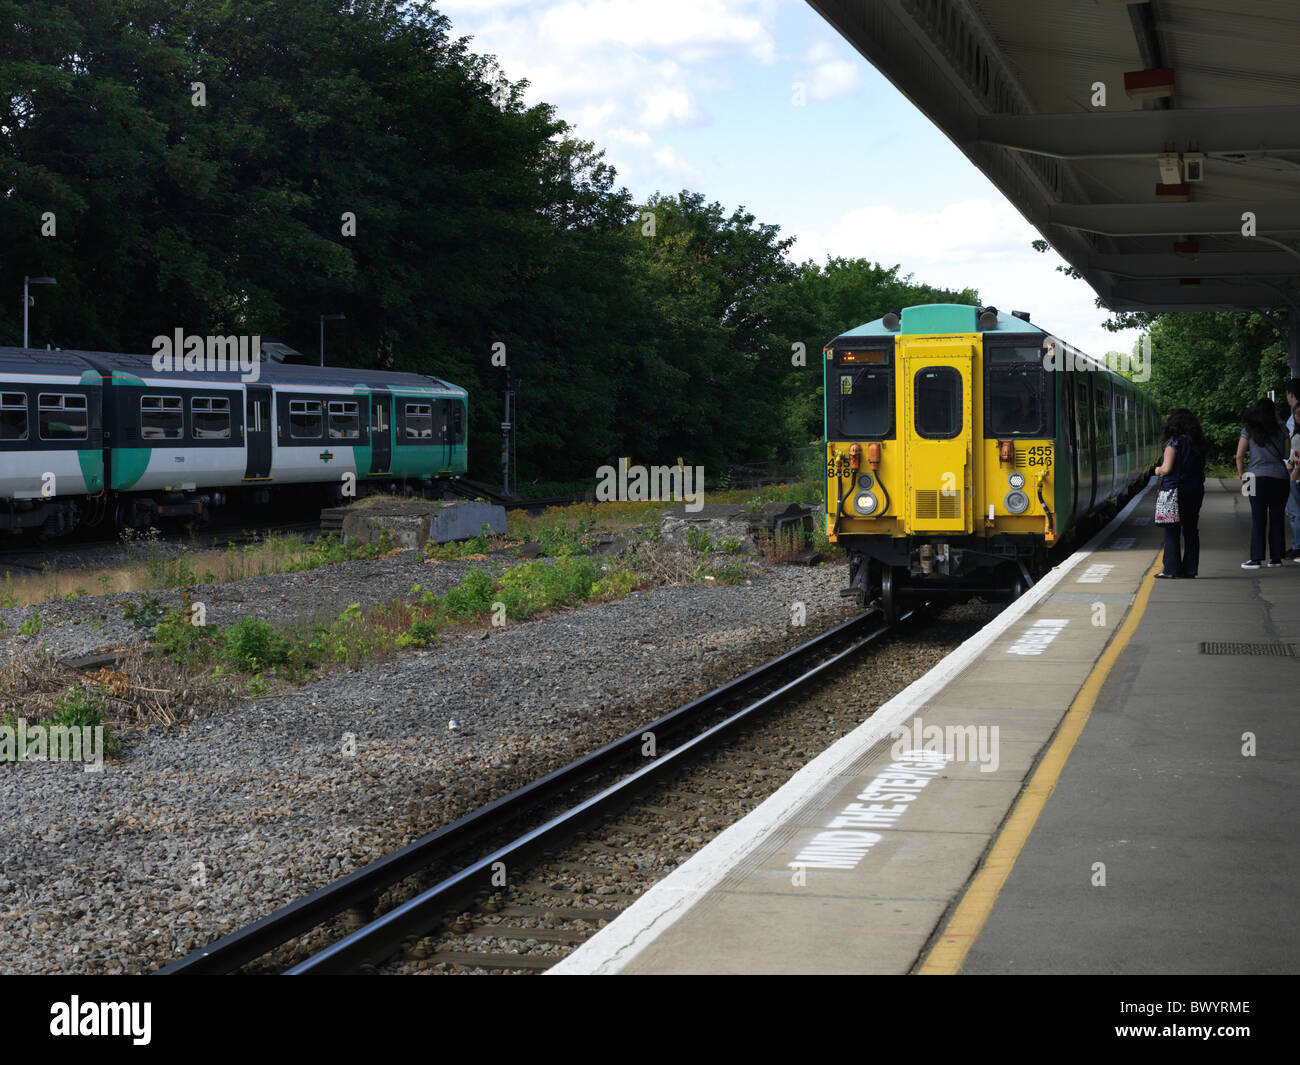 Cheam Surrey England Train Arriving and A Train Leaving cheam station People Waiting On Platform Stock Photo